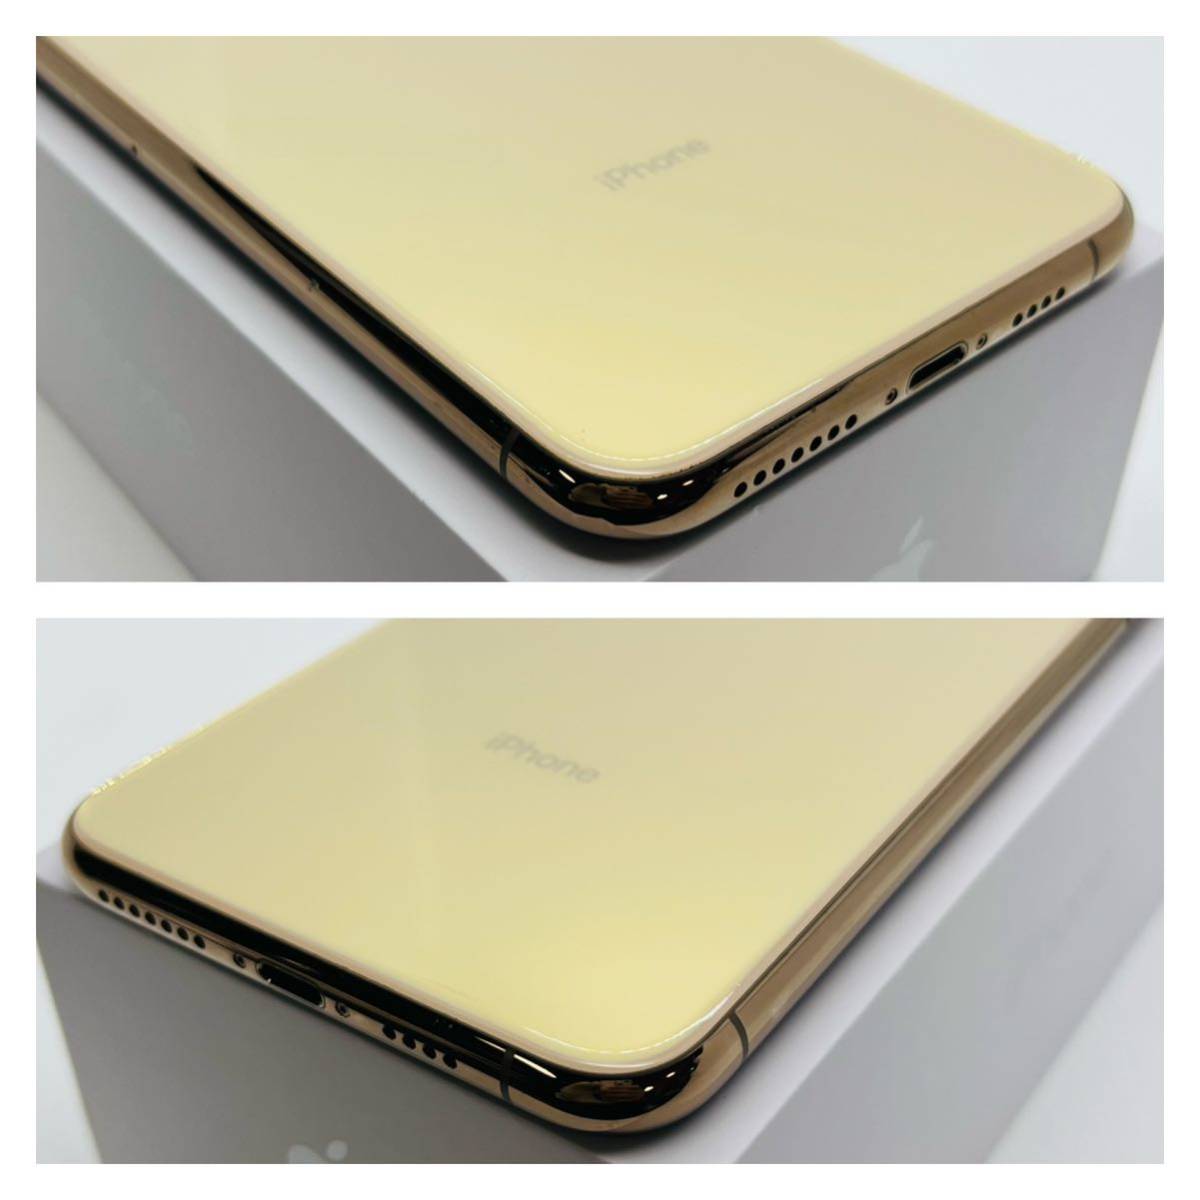 A 新品電池 iPhone Xs Max Gold 256 GB SIMフリー｜PayPayフリマ